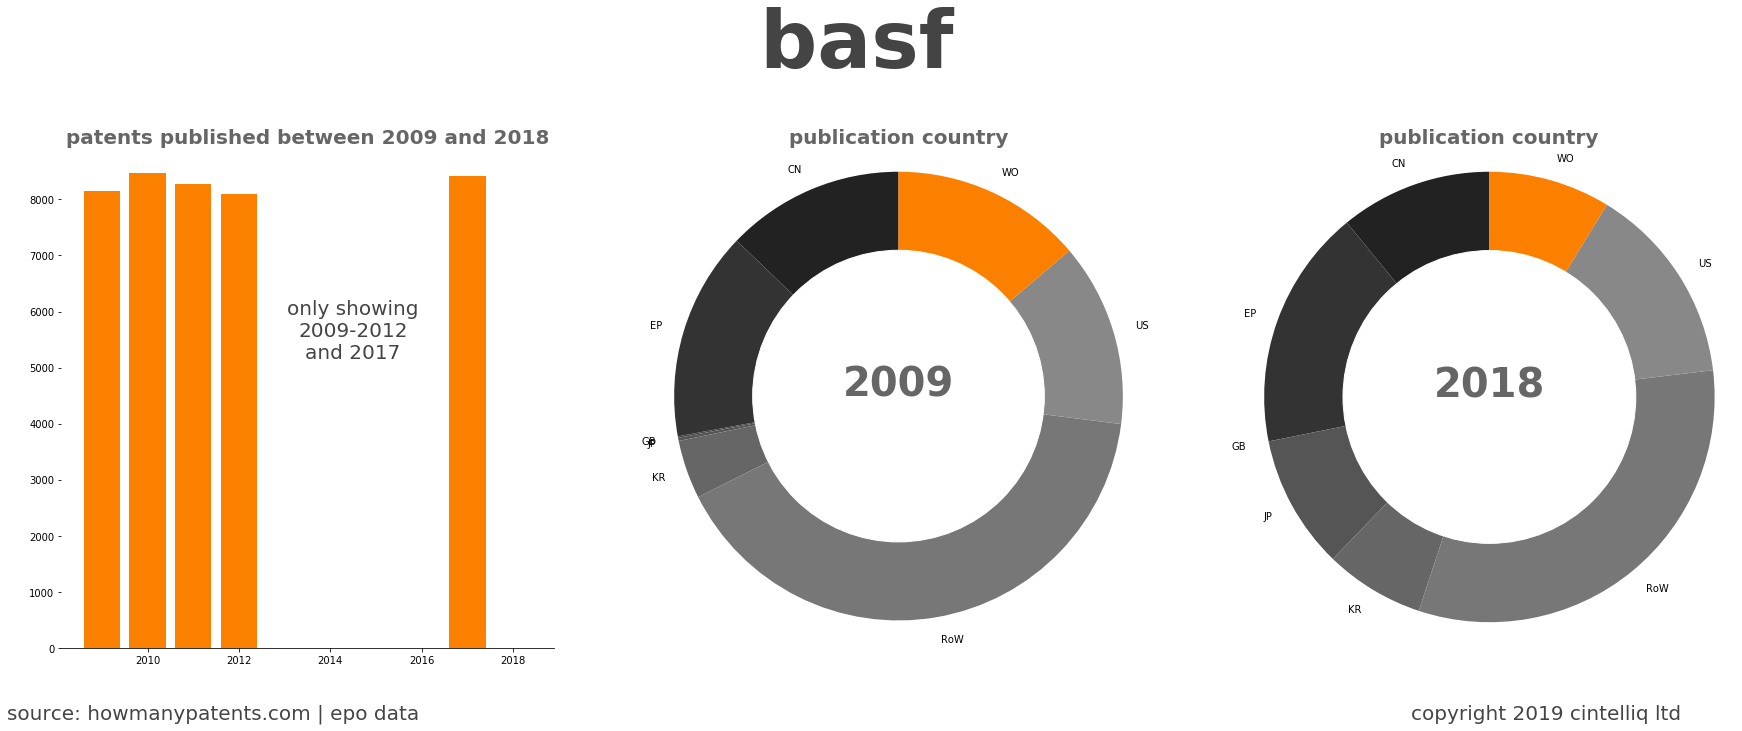 summary of patents for Basf 